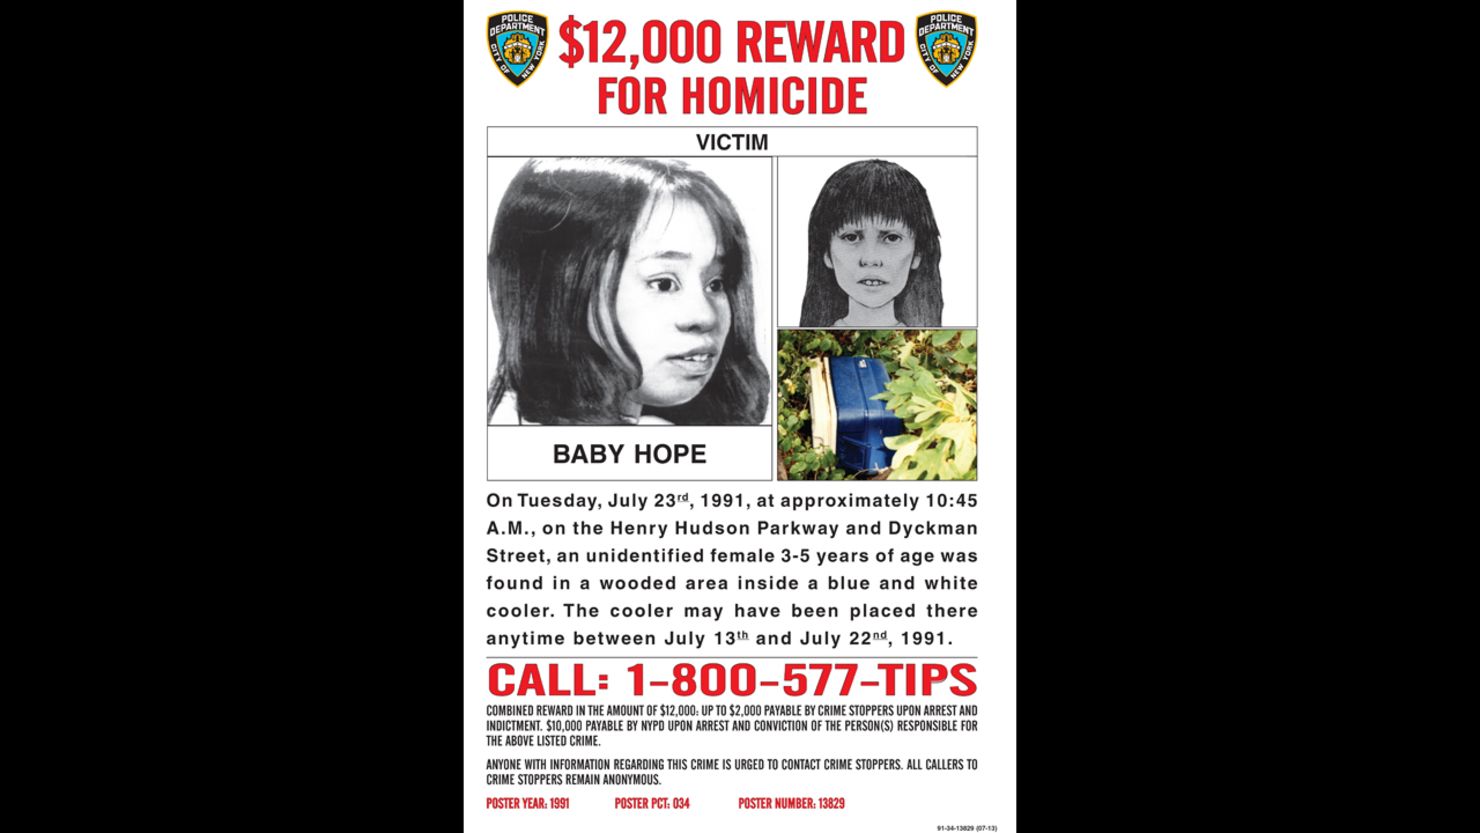 "Baby Hope's" body was found in a picnic cooler in a wooded area near the Henry Hudson Parkway in New York on July 23, 1991.